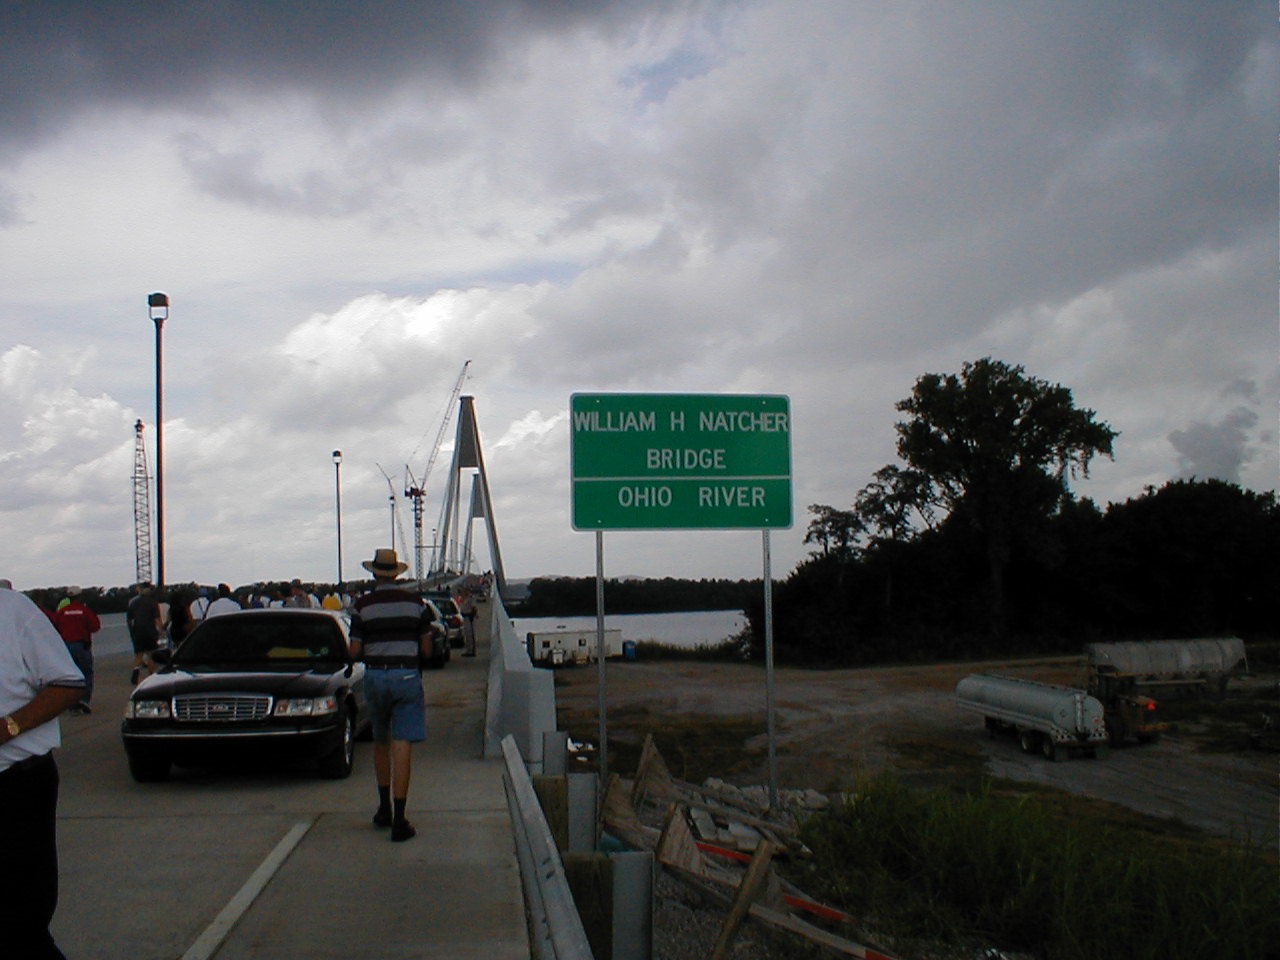 Visitors pass by the "William H. Natcher Bridge" sign as they begin their walk across the bridge.